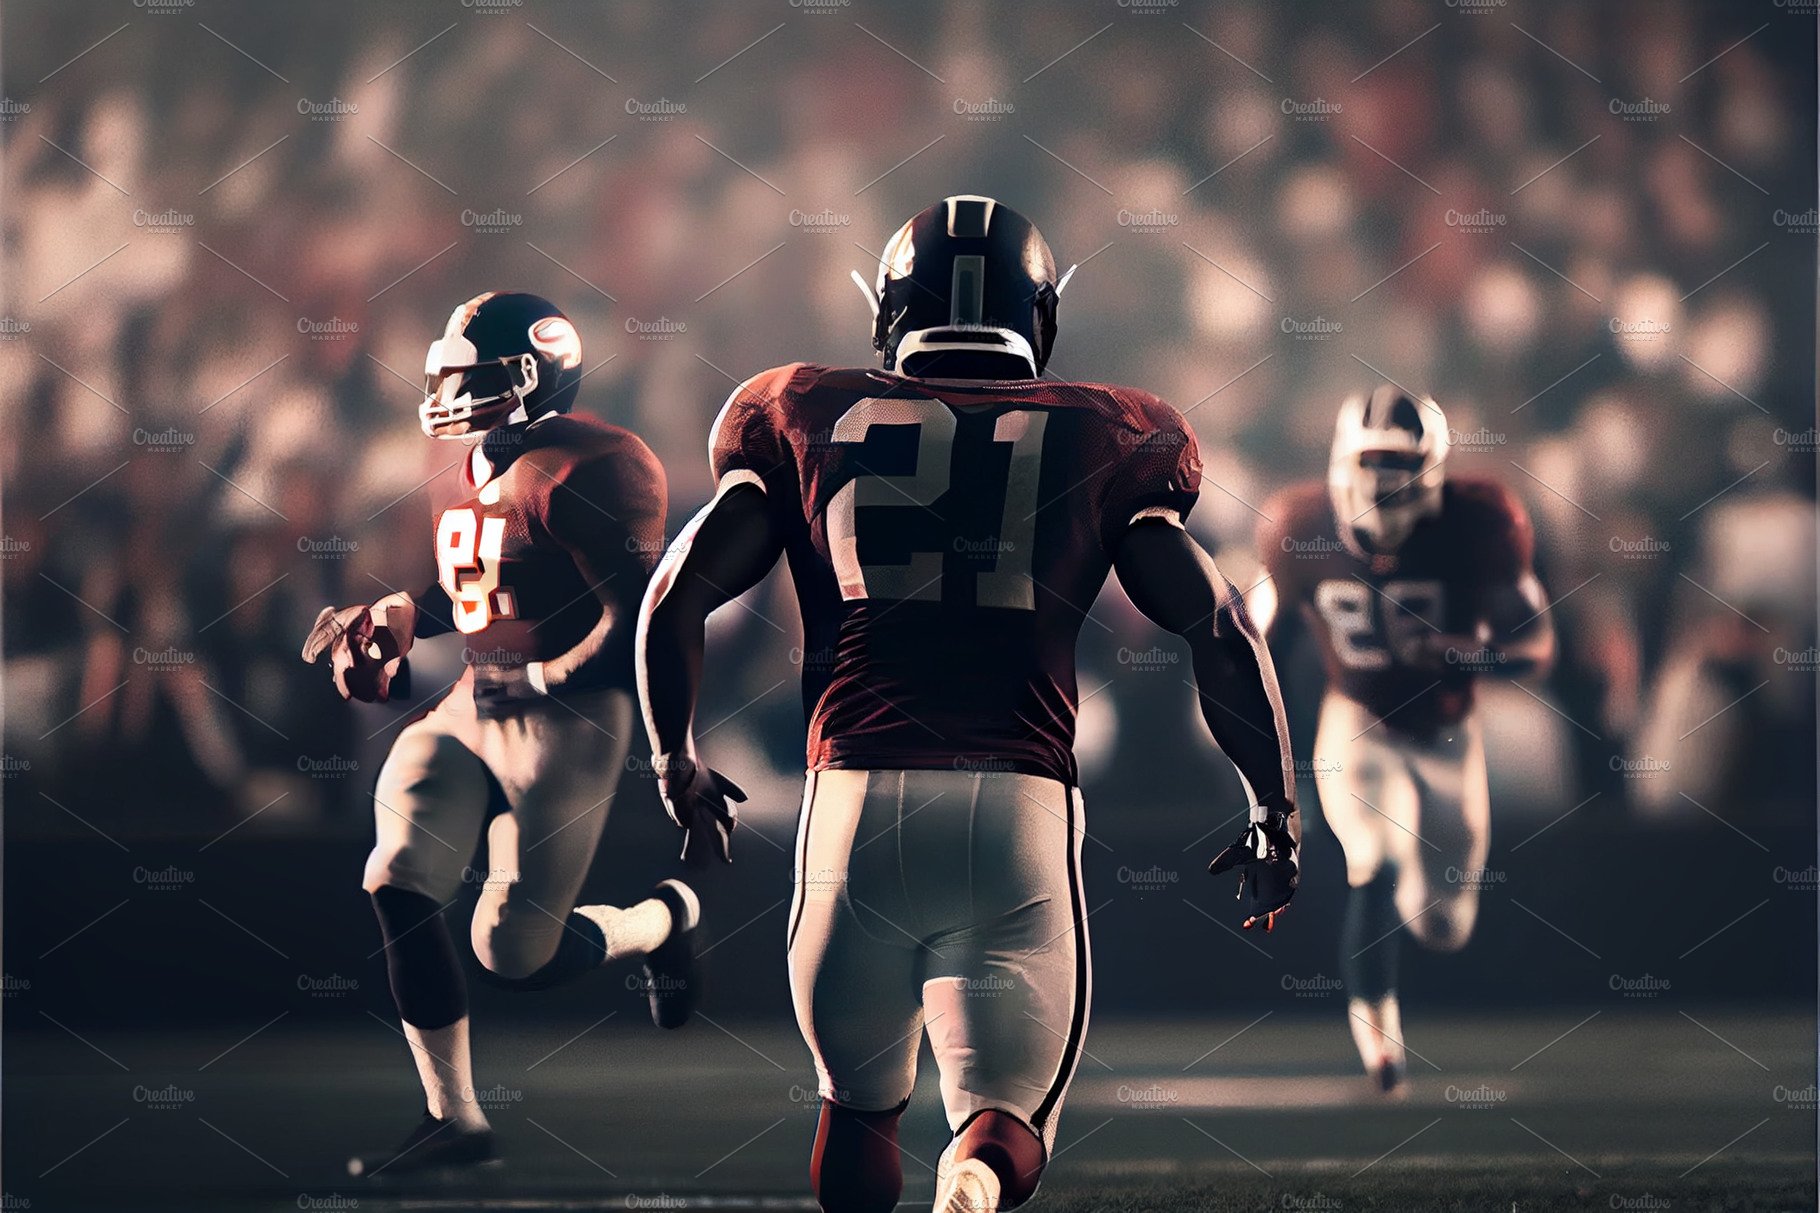 American football player running fast towards goal line cover image.